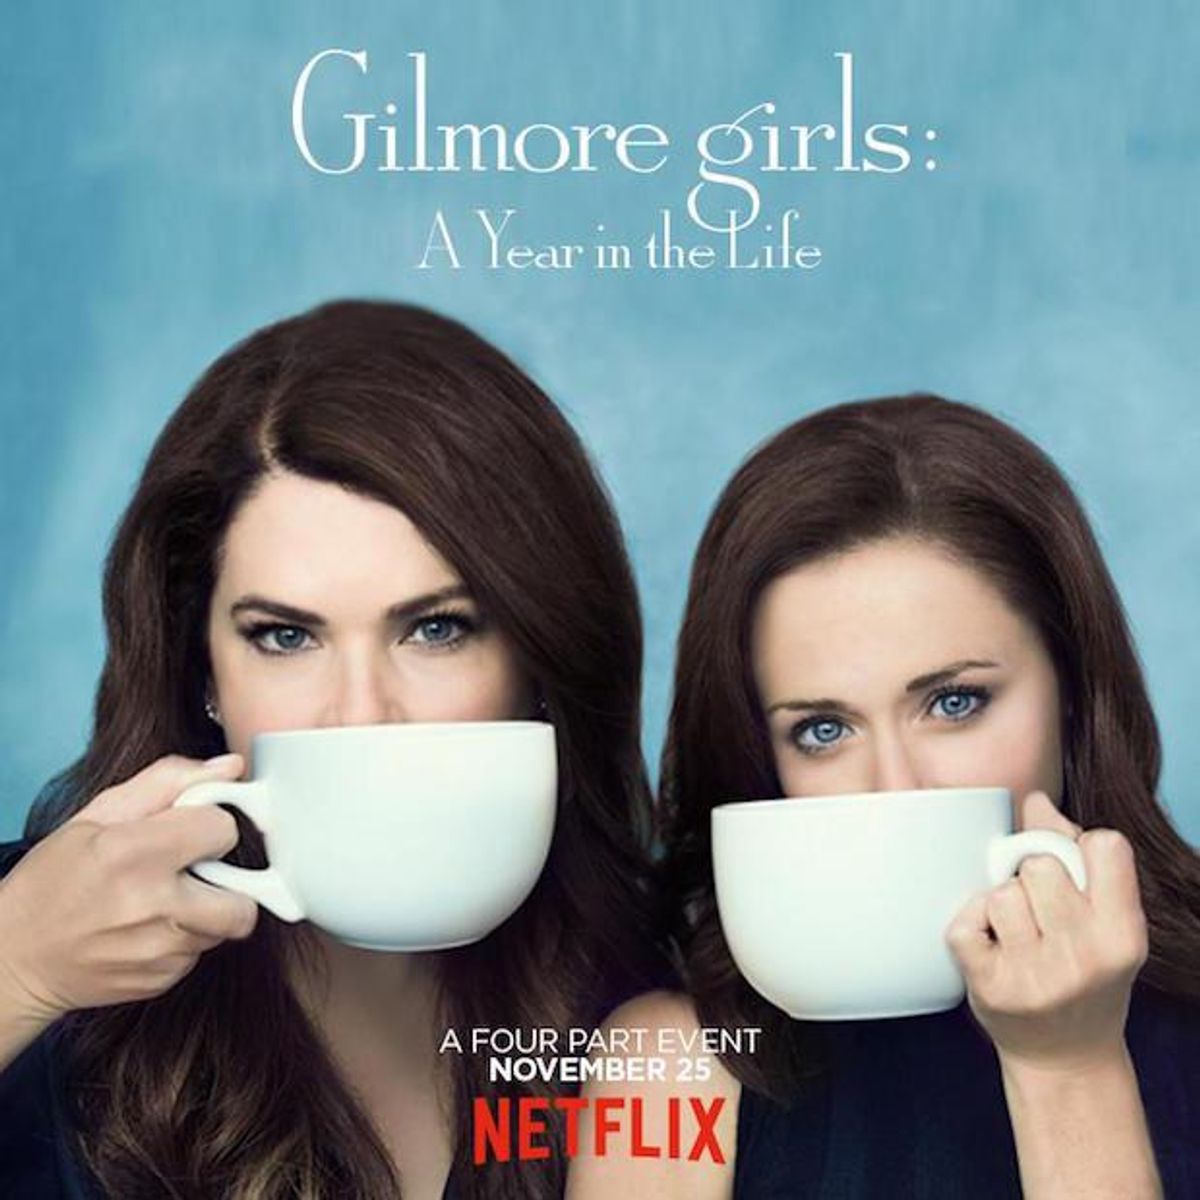 My Thoughts on the Gilmore Girls Revival